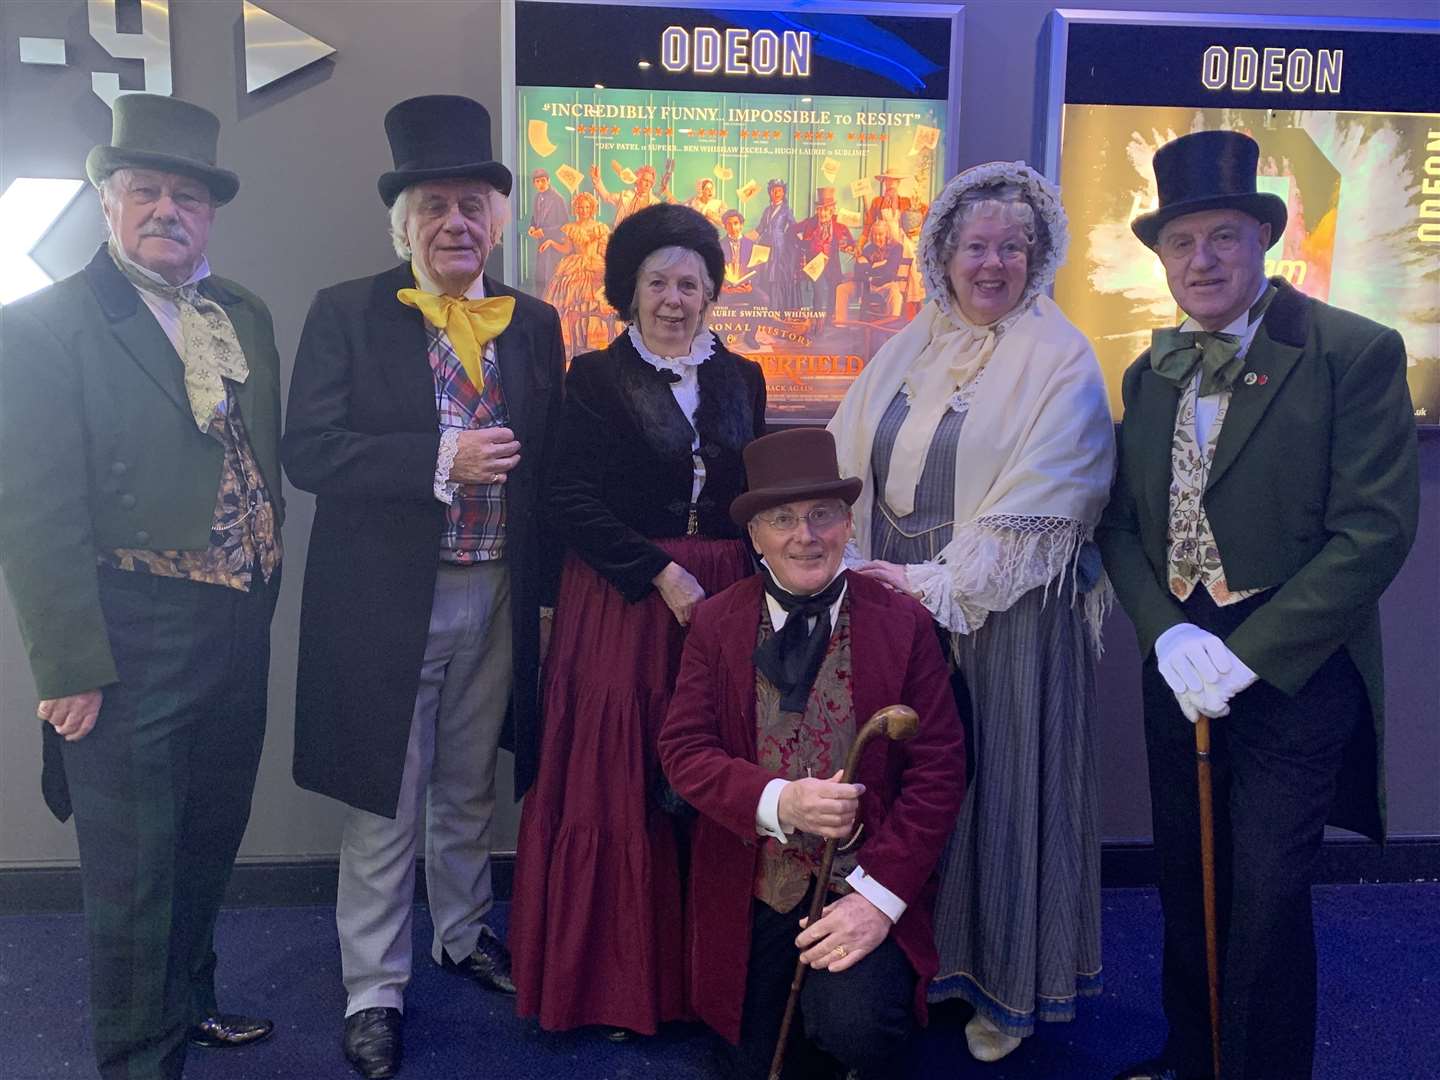 Members of the Rochester and Chatham Dickens Fellowship at Odeon in Chatham.